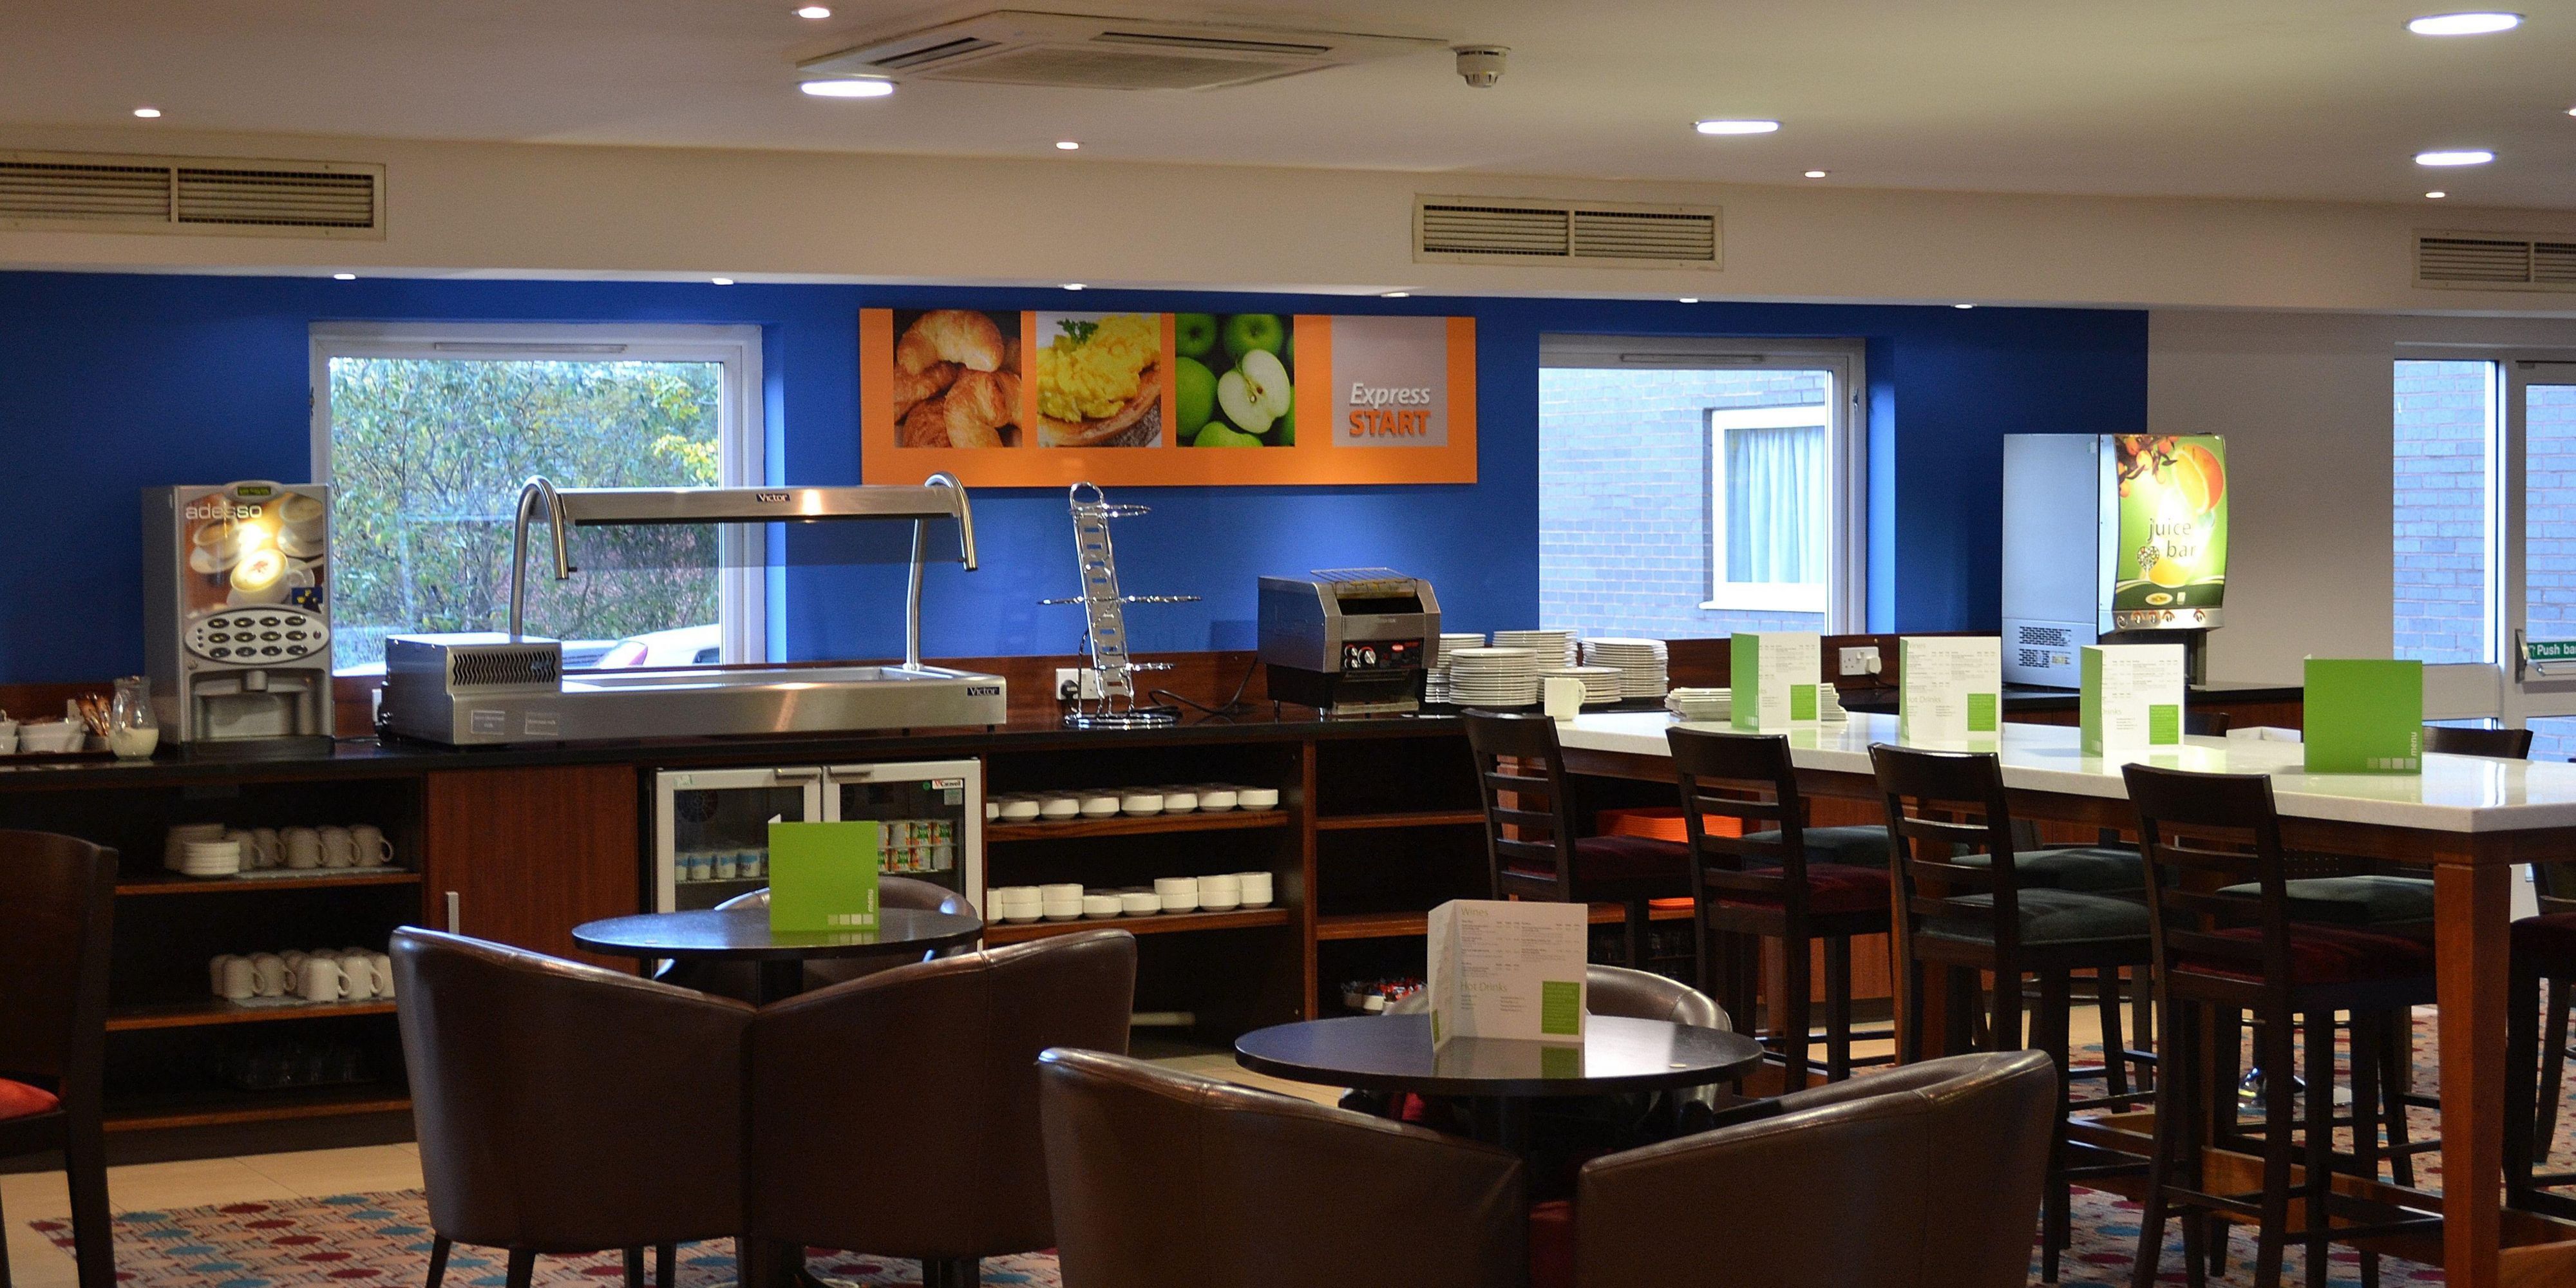 We now offer dining at the hotel
Our Sage Restaurant offers some great dining options so all you have to do is get yourself a pint of ale from the Lounge Bar and relax and enjoy a home-cooked meal at Holiday Inn Express Braintree. 